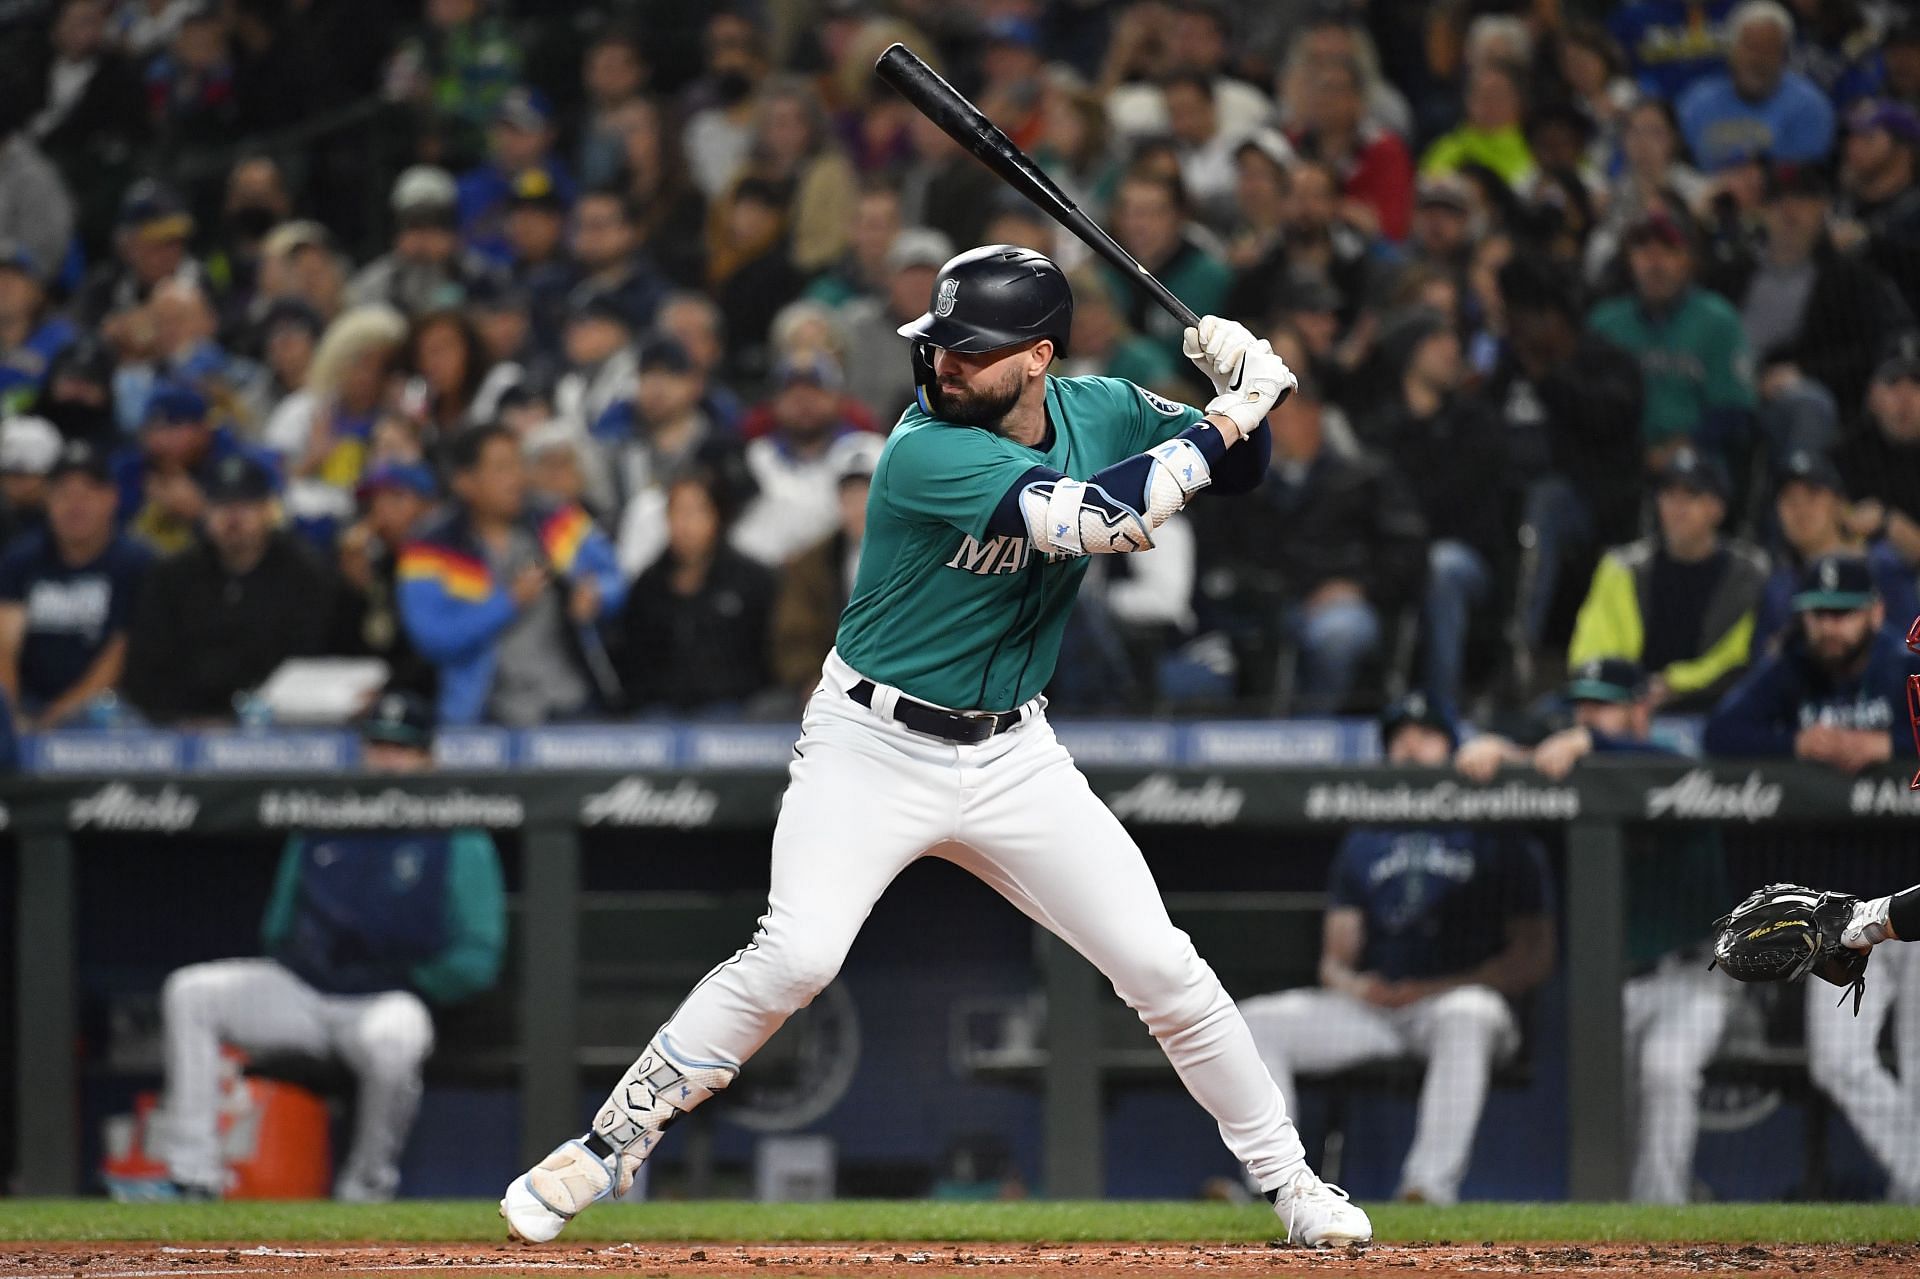 Mariners celebrate Jesse Winker with standing ovation, pizza pin after  brawl with Angels